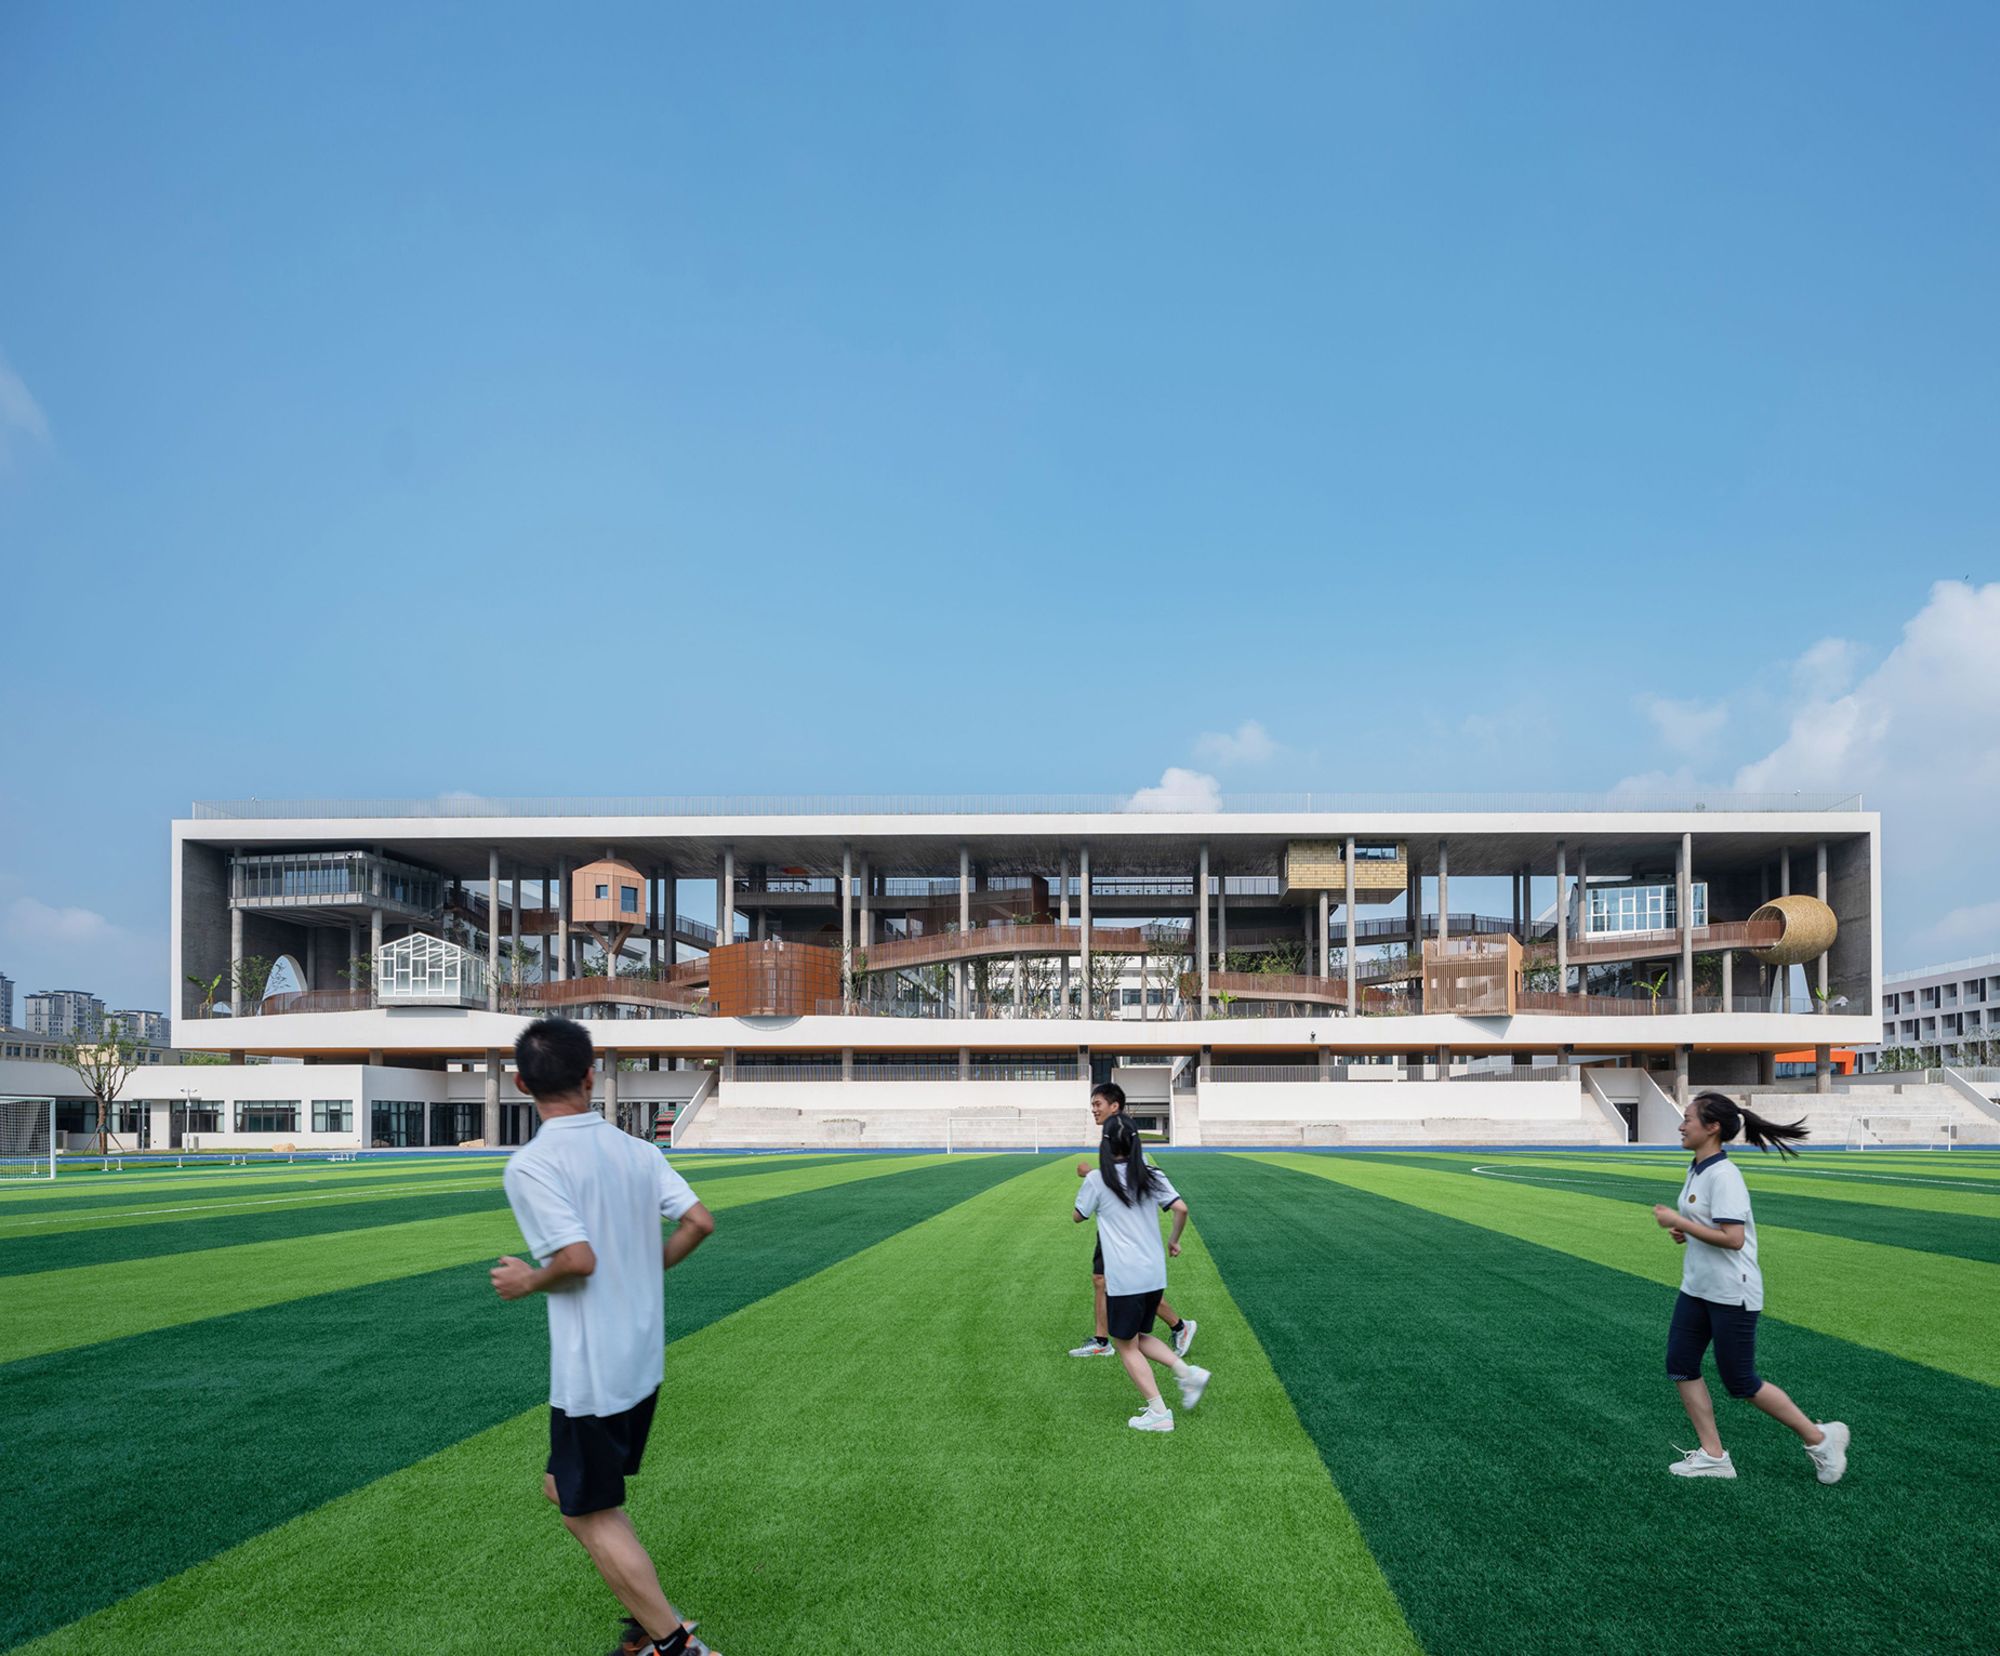 Huizhen High School is "a bold exploration of ‘efficiency-first’ campus design," the World Architecture Festival said.